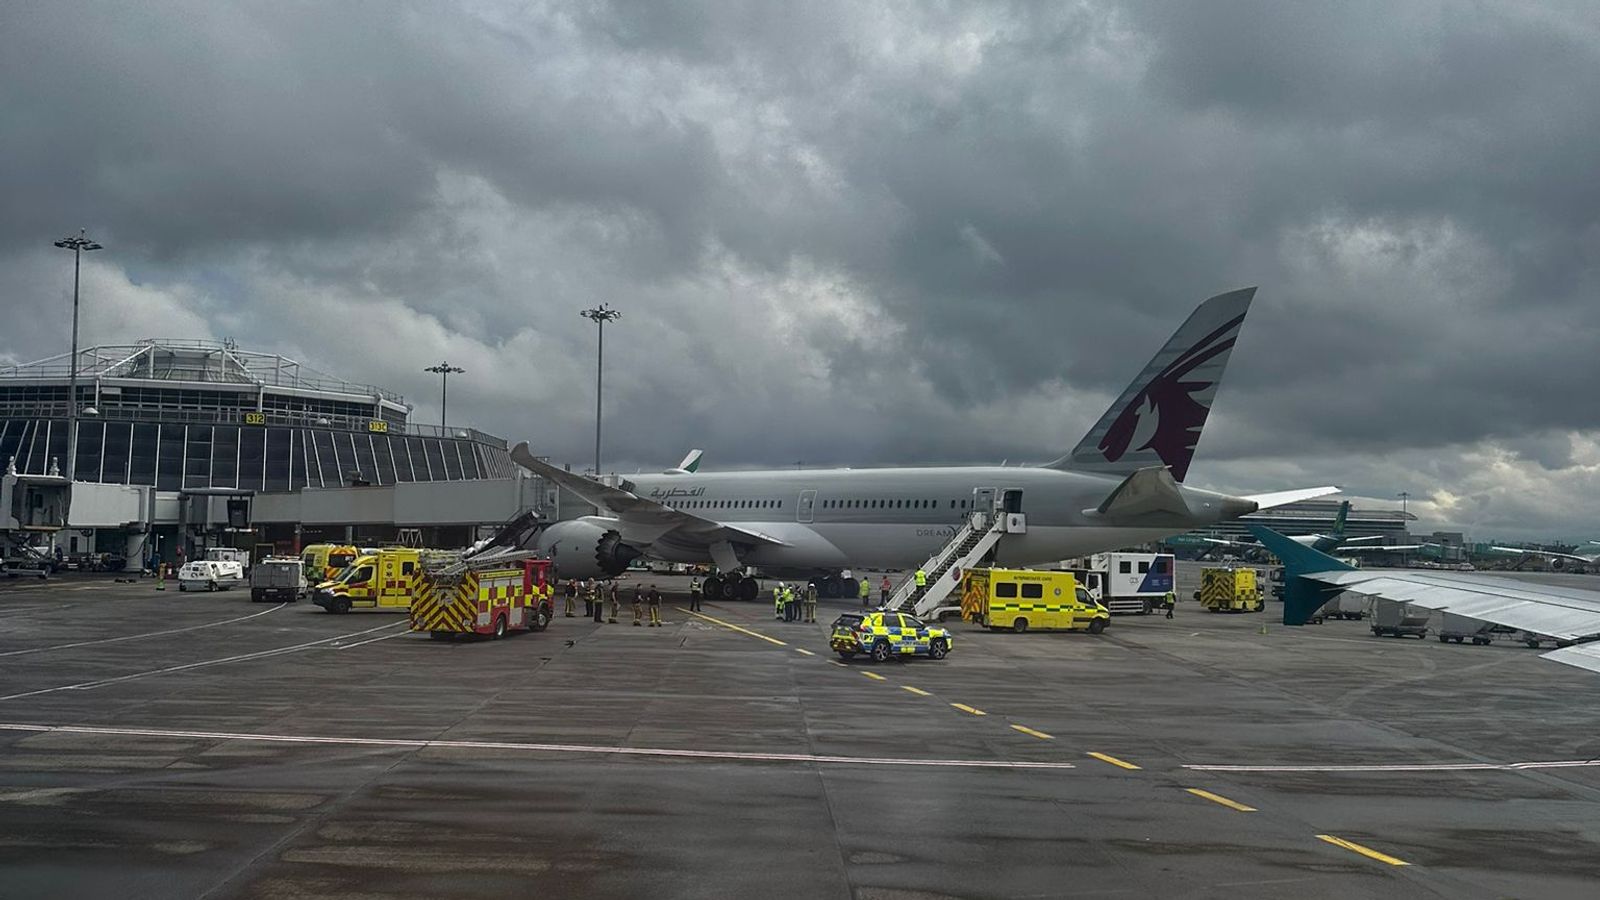 Passengers and crew injured after turbulence on Qatar Airways flight to Dublin